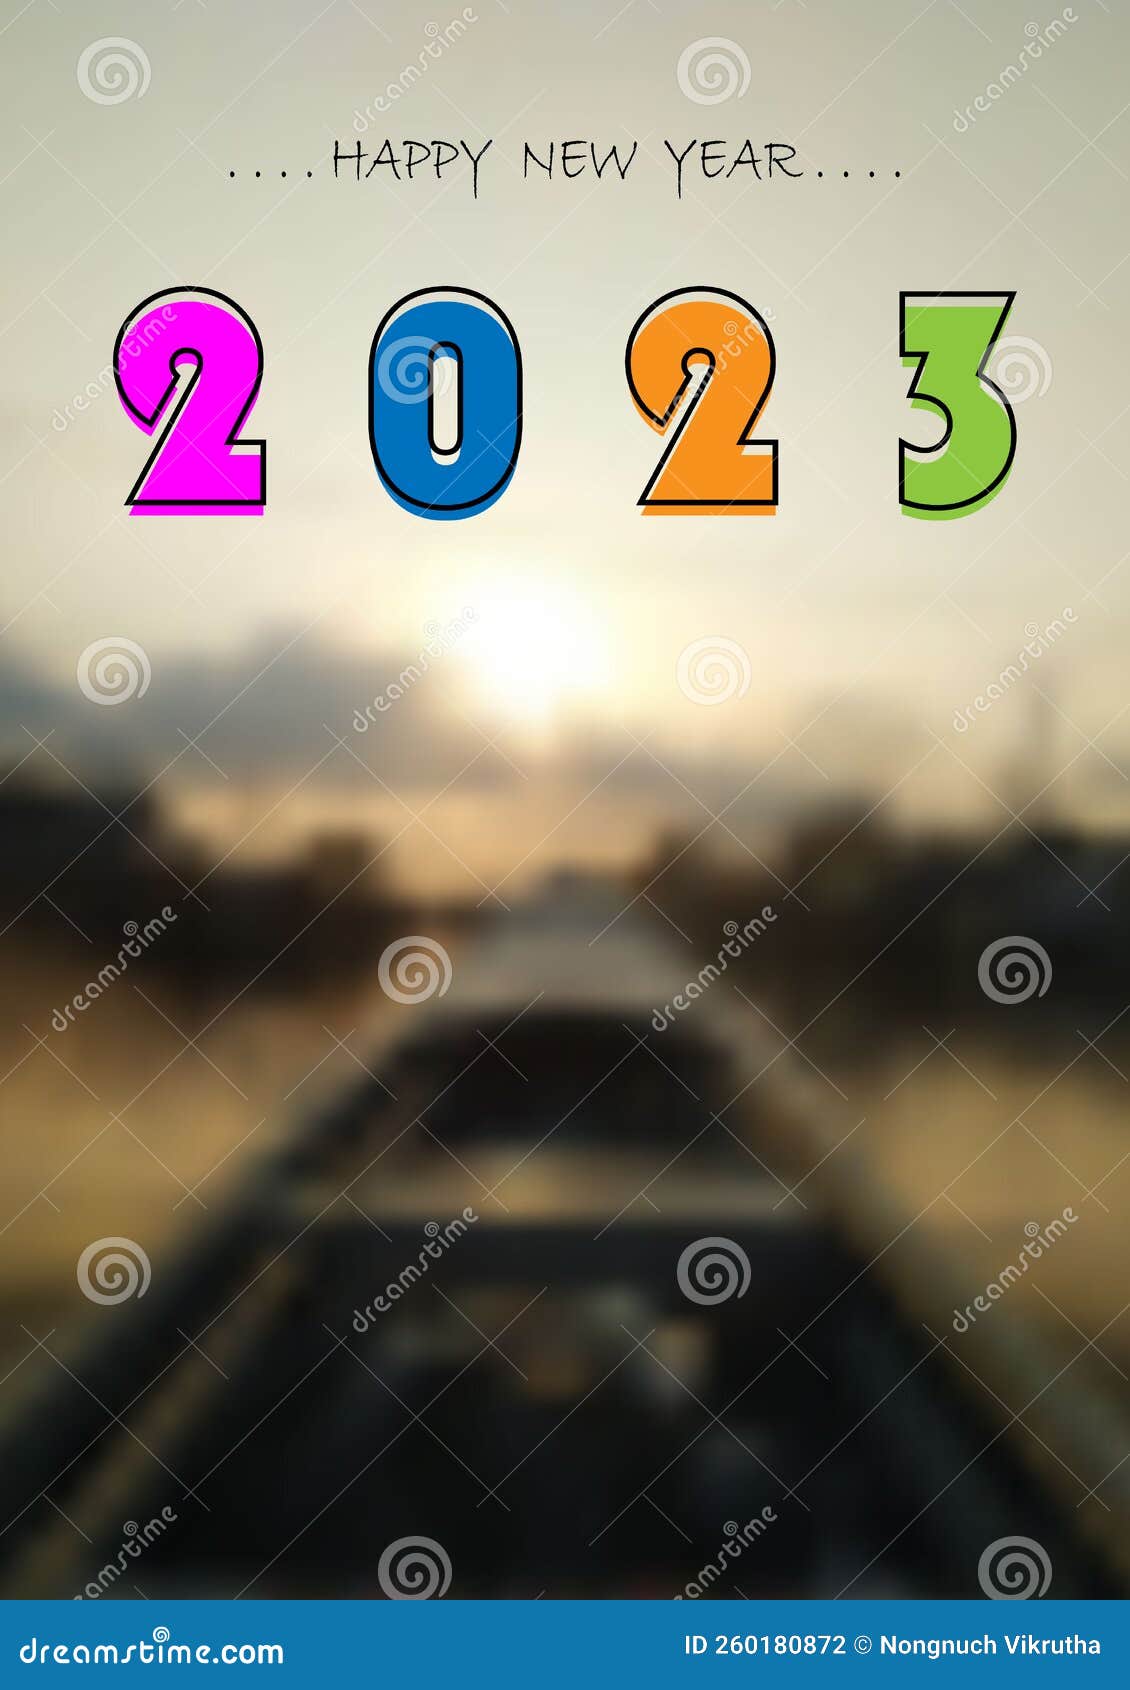 Happy New Year 2023 Celebration Poster Design. Element and Dark Background  Vector Stock Photo - Image of element, number: 260180872